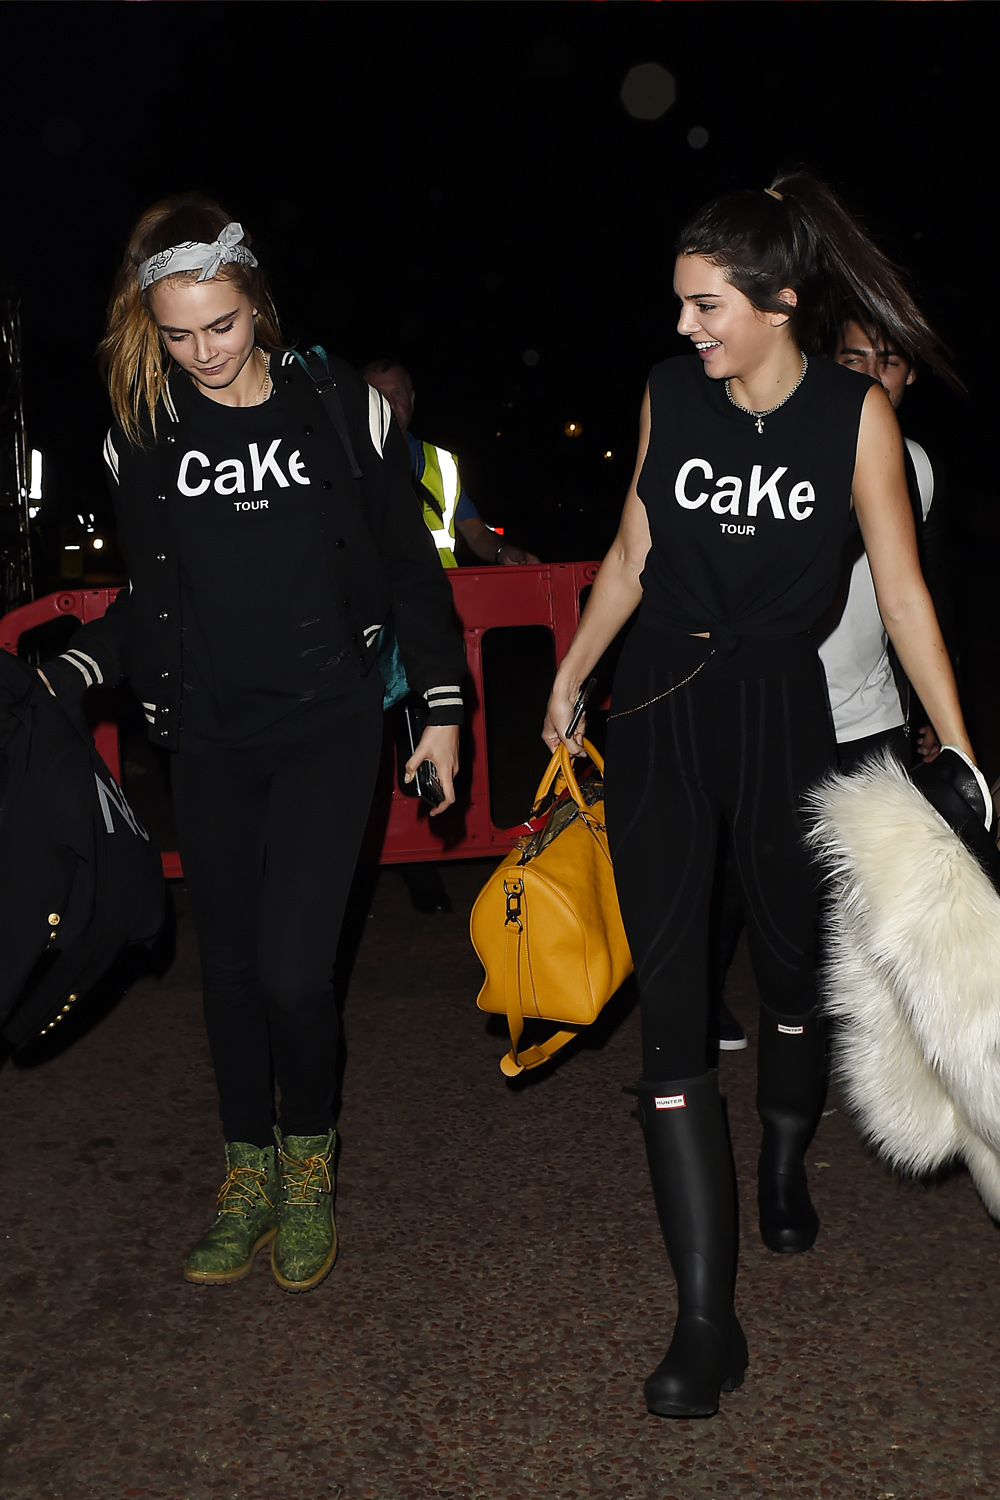 Cara Delevingne and Kendall Jenner, affectionately known as CAKE.